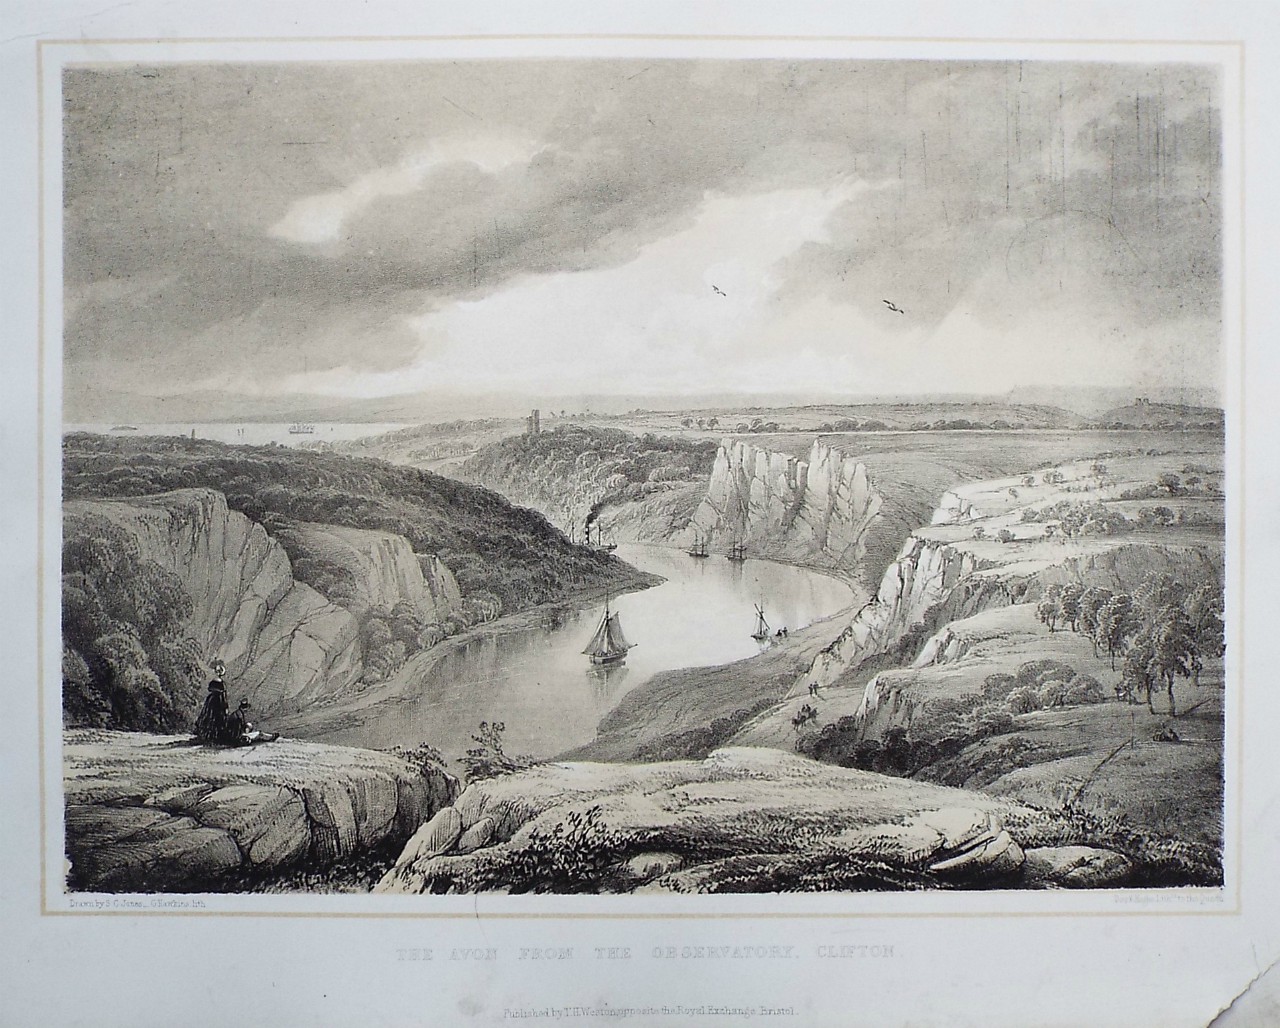 Lithograph - The Avon from the Observatory, Clifton. - Hawkins